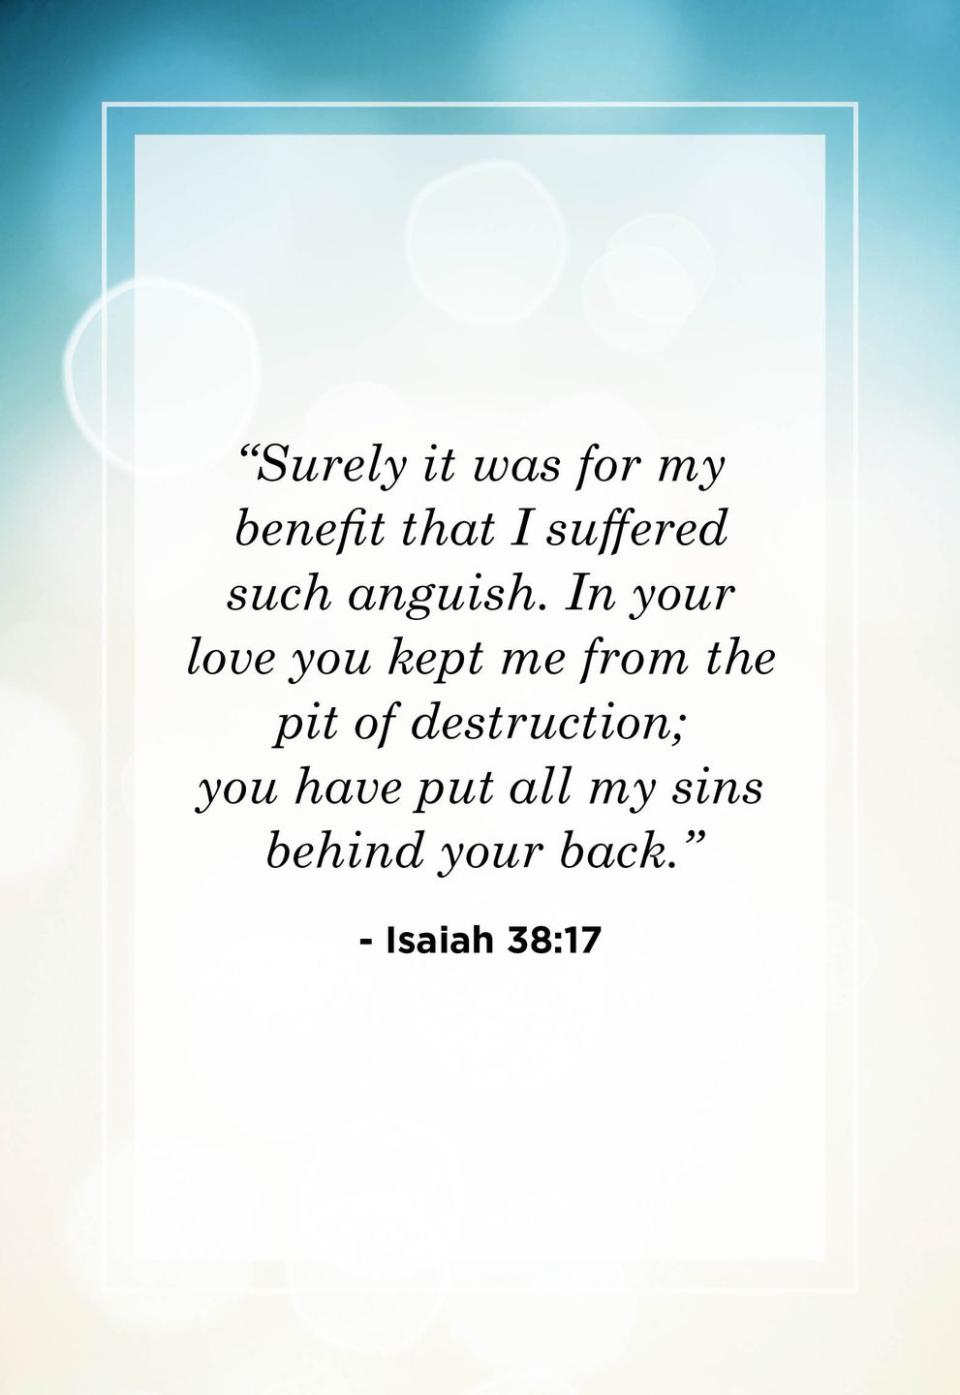 <p>"Surely it was for my benefit that I suffered such anguish. In your love you kept me from the pit of destruction; you have put all my sins behind your back."</p>